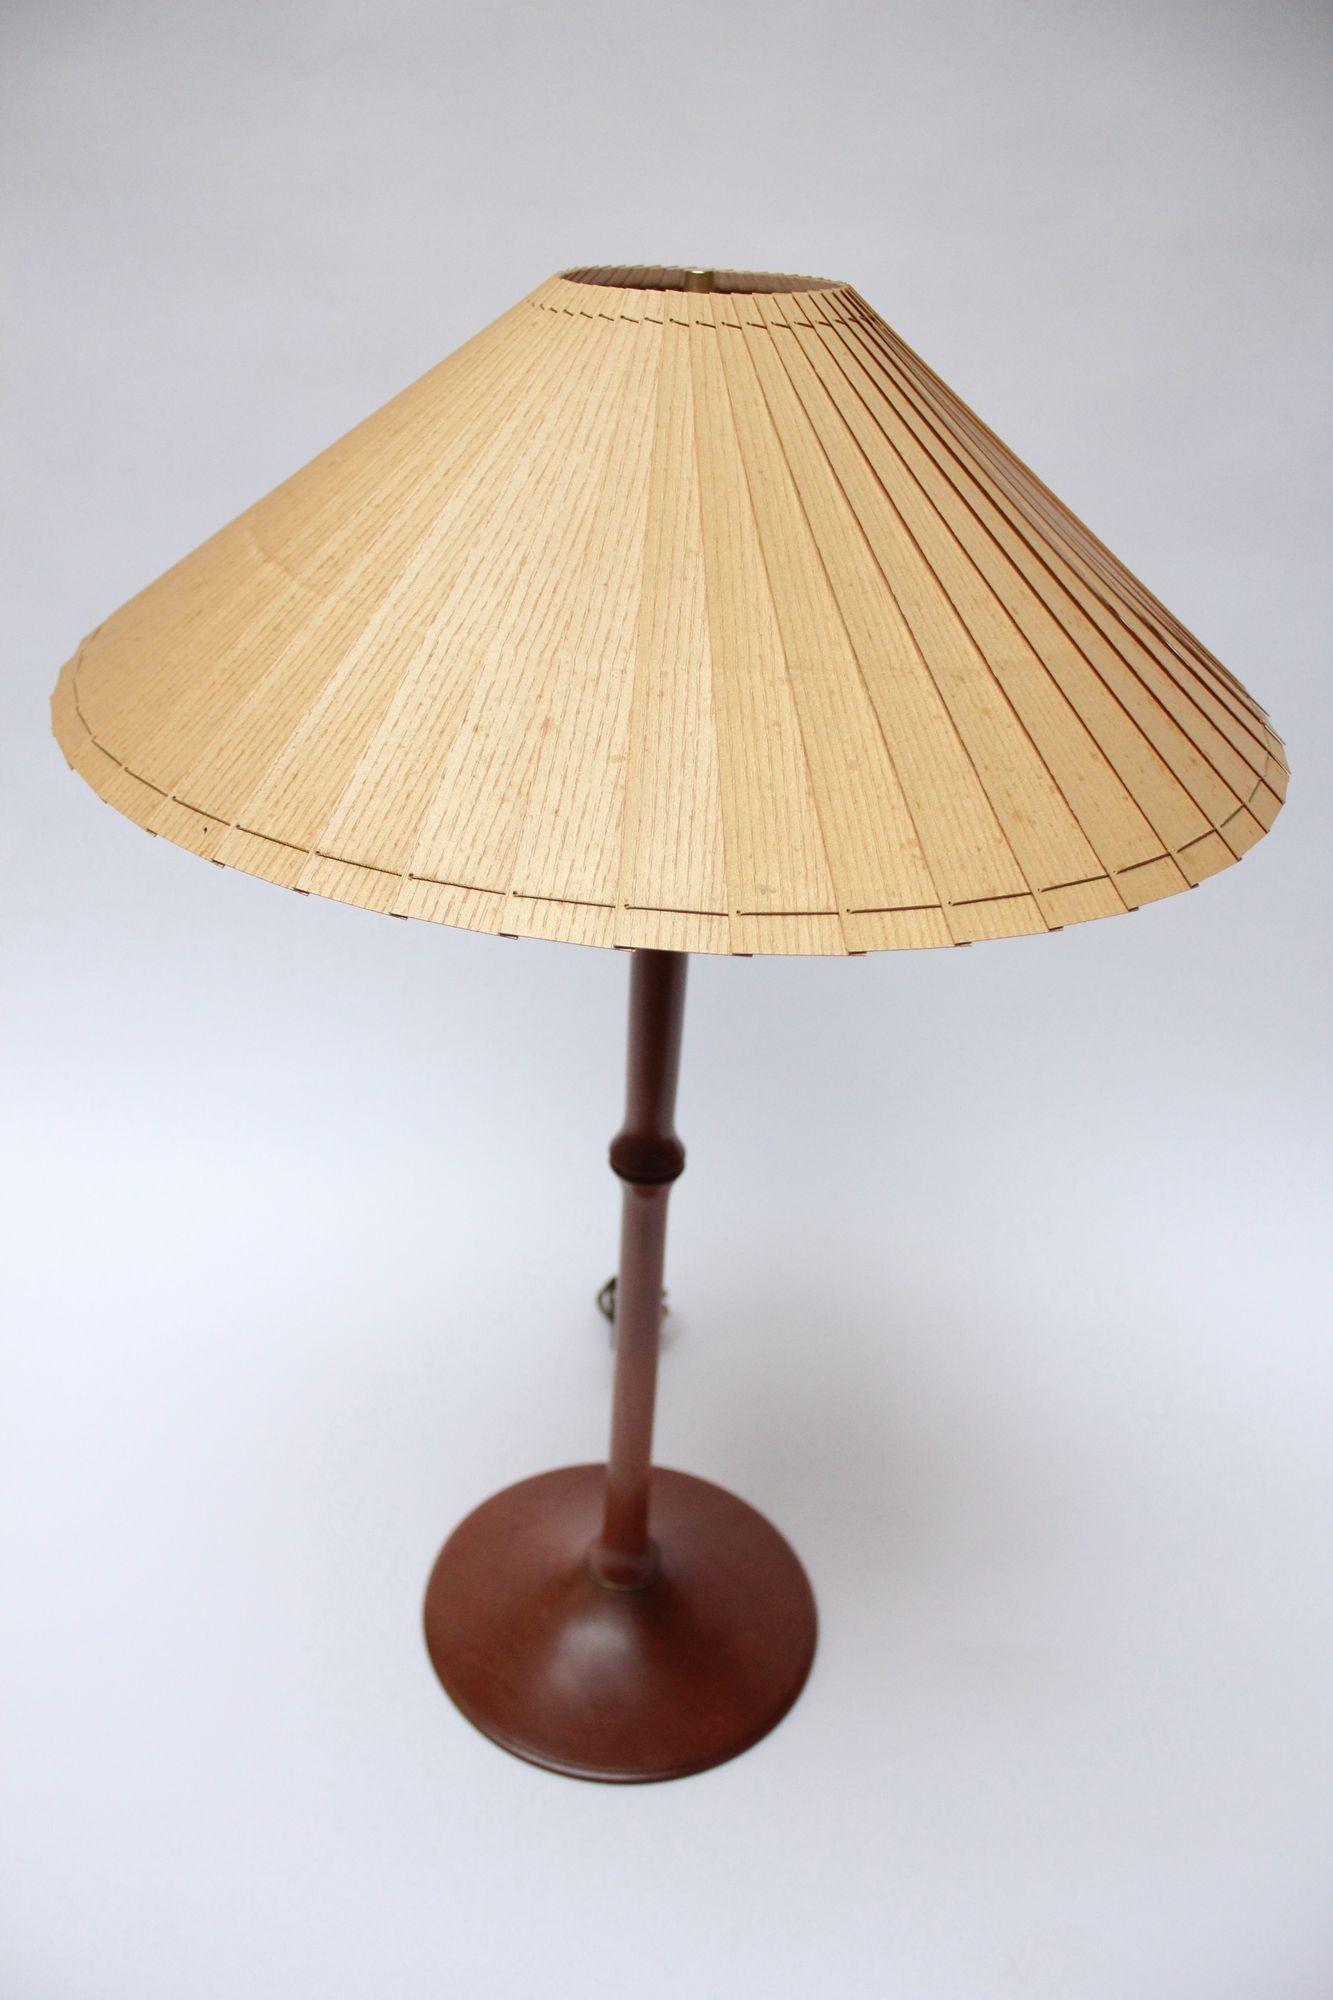 Sculptural cherrywood table lamp with brass accents and original paper shade (Vermont, USA, 1995).
Fitted with a double-socket accommodating two bulbs with an on/off pull-string switch.
Newly rewired condition. Excellent, vintage condition with a